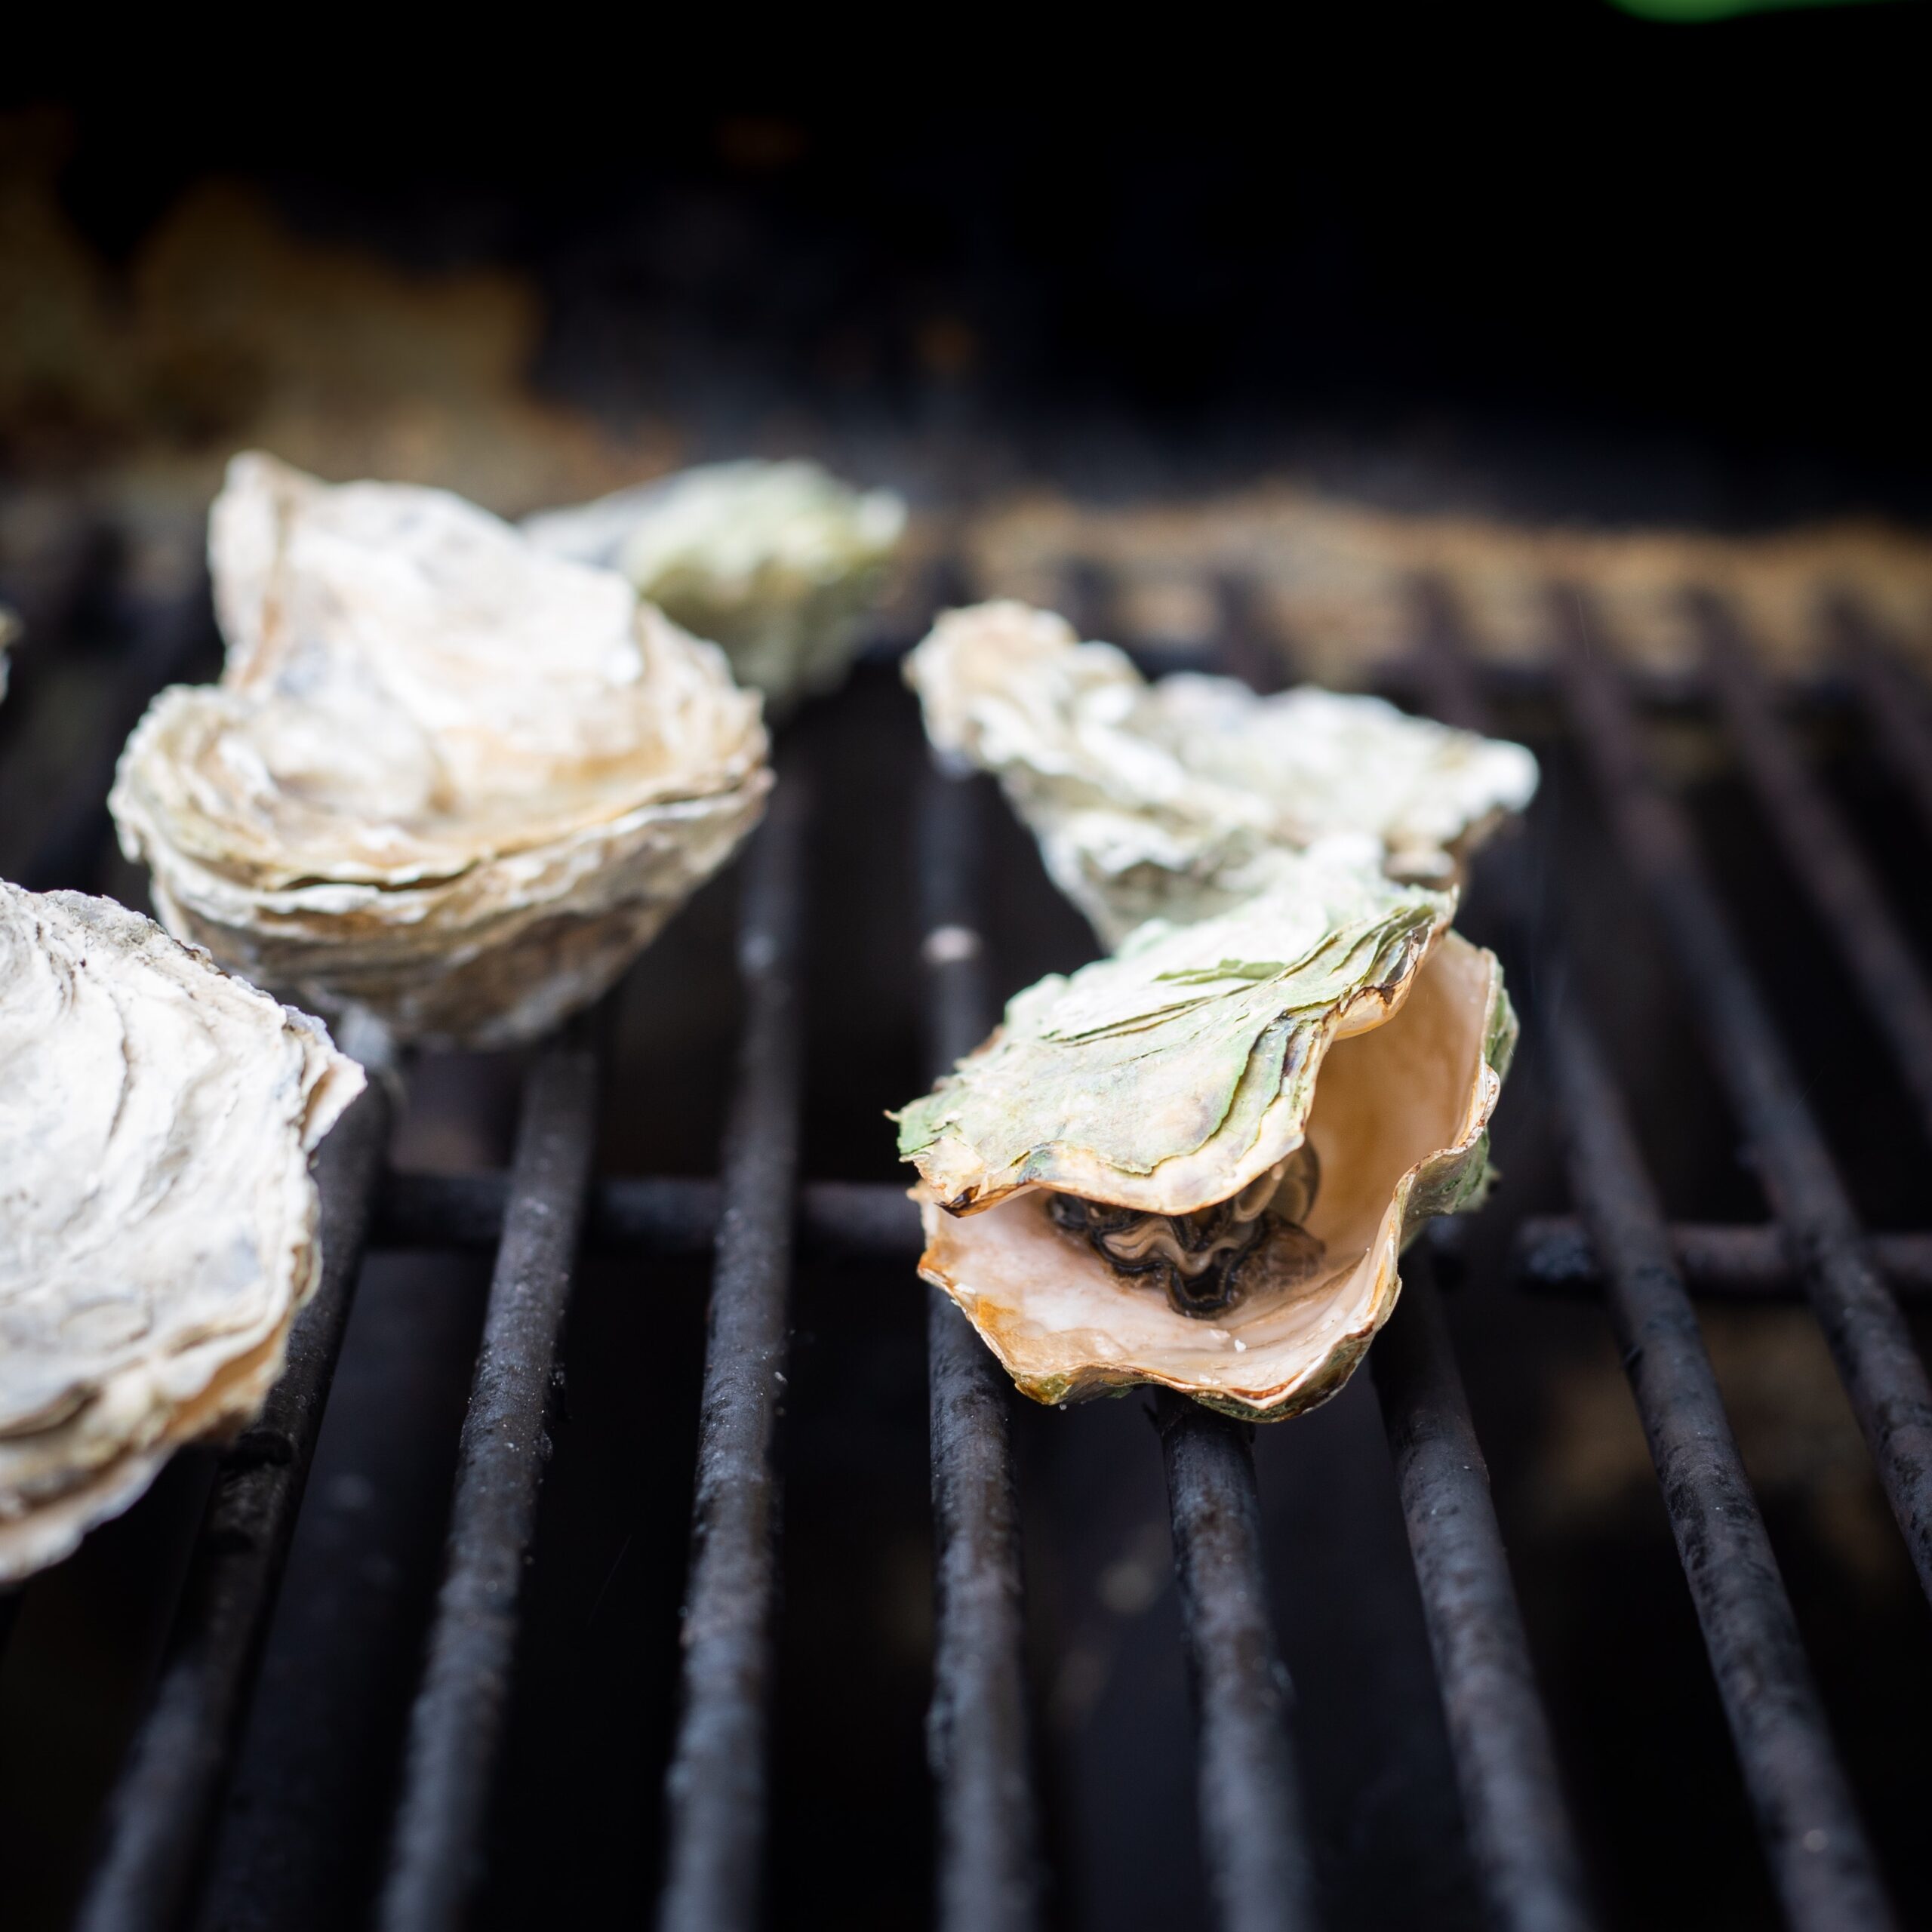 Oysters in the shell starting to open on a grill.